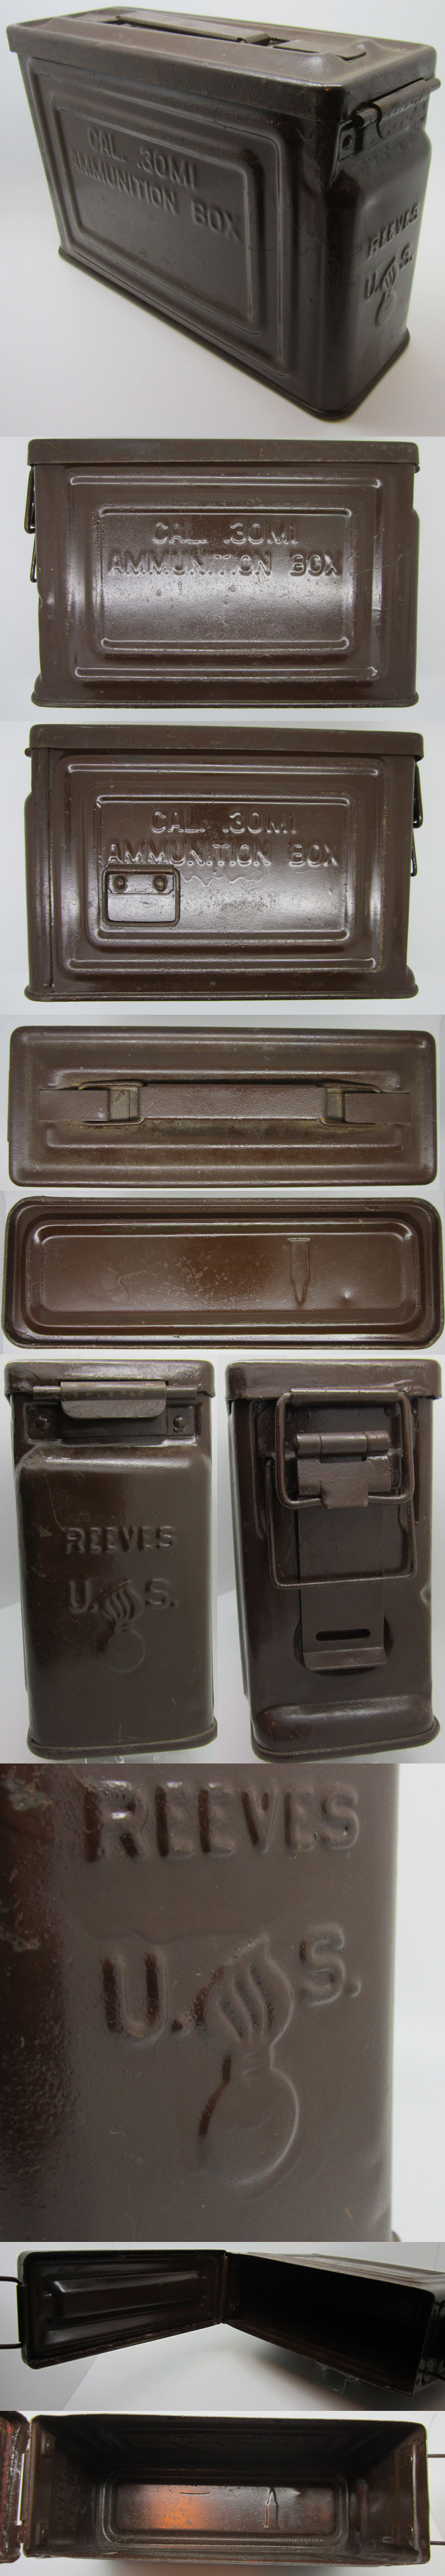 US .30 Cal Ammunition Box by REEVES